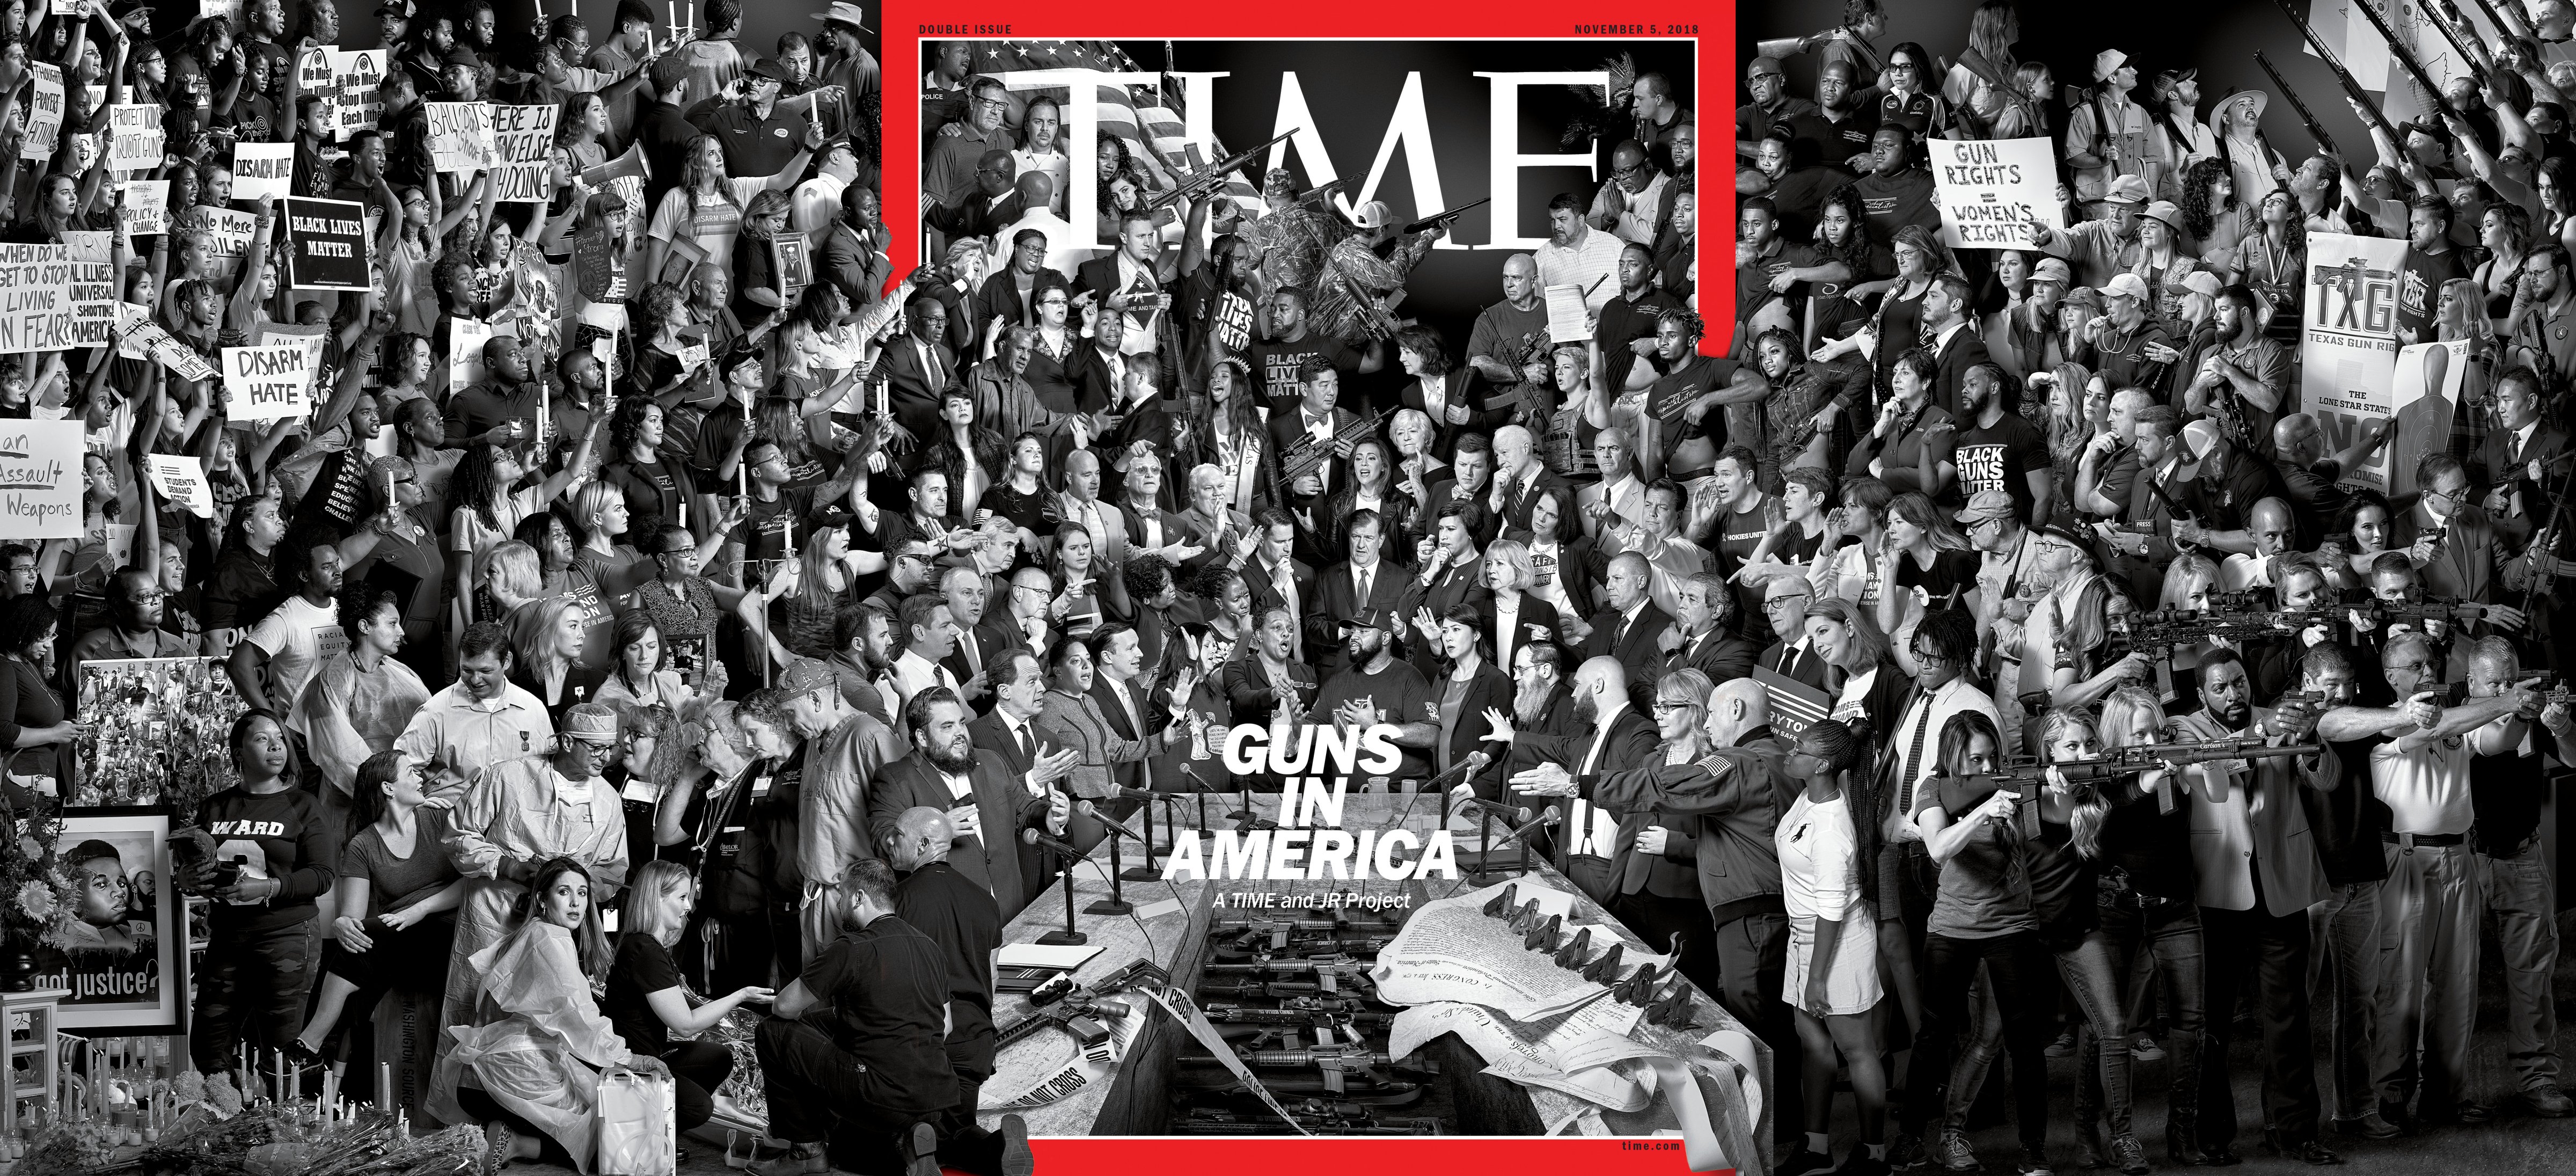 Guns in America TIME cover (A TIME and JR Project)